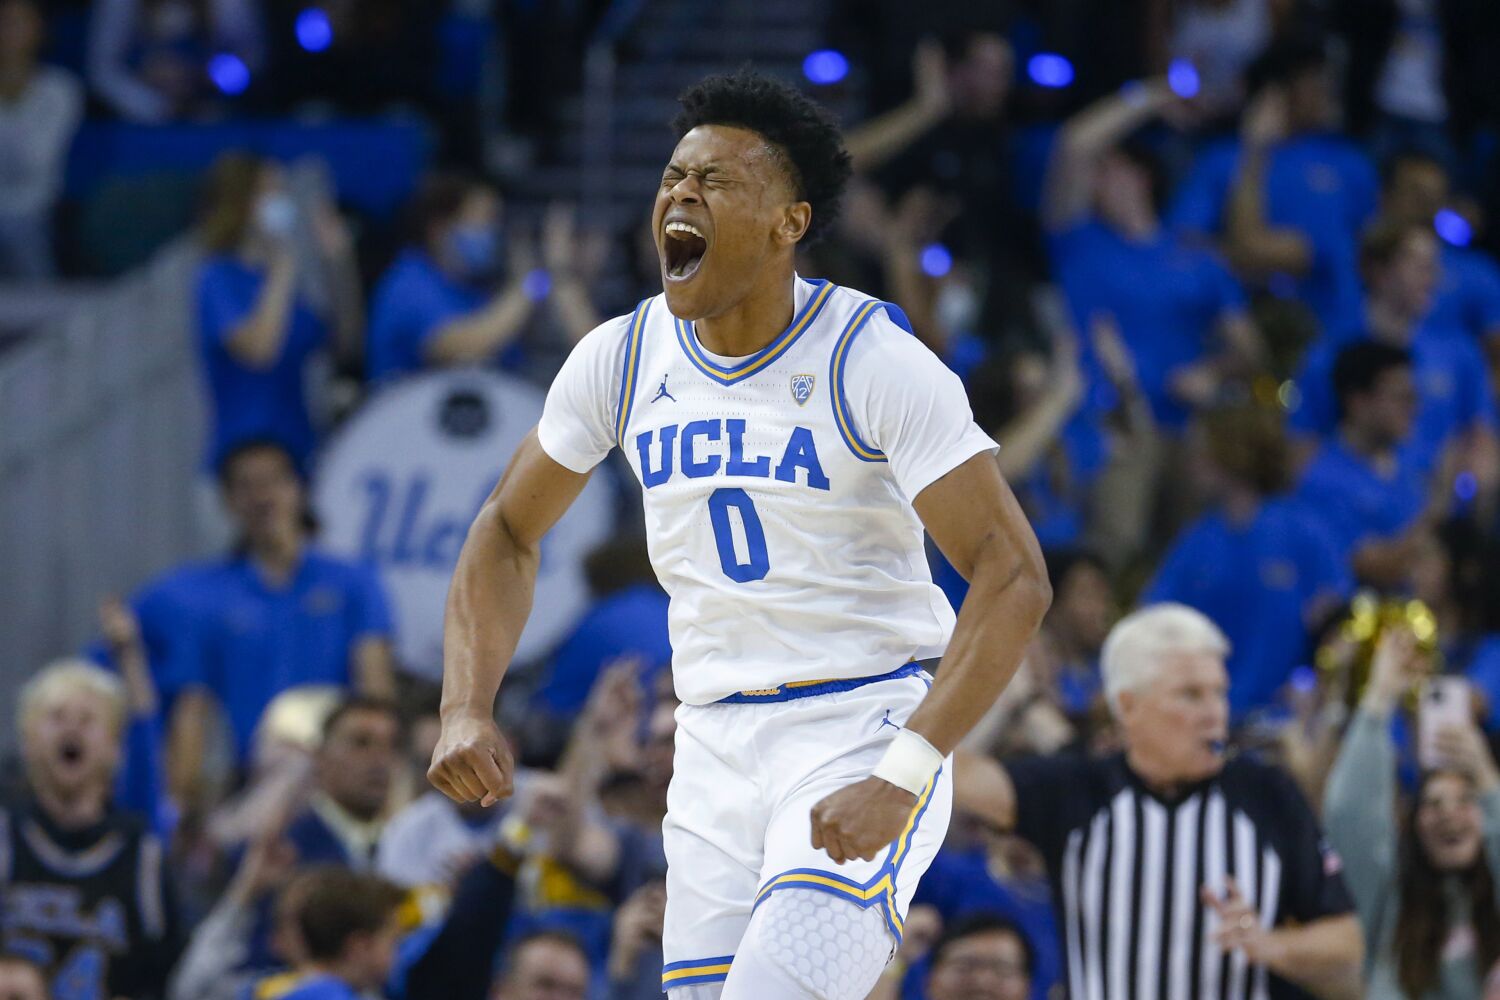 Jaylen Clark becomes UCLA's first Naismith defensive player of the year winner